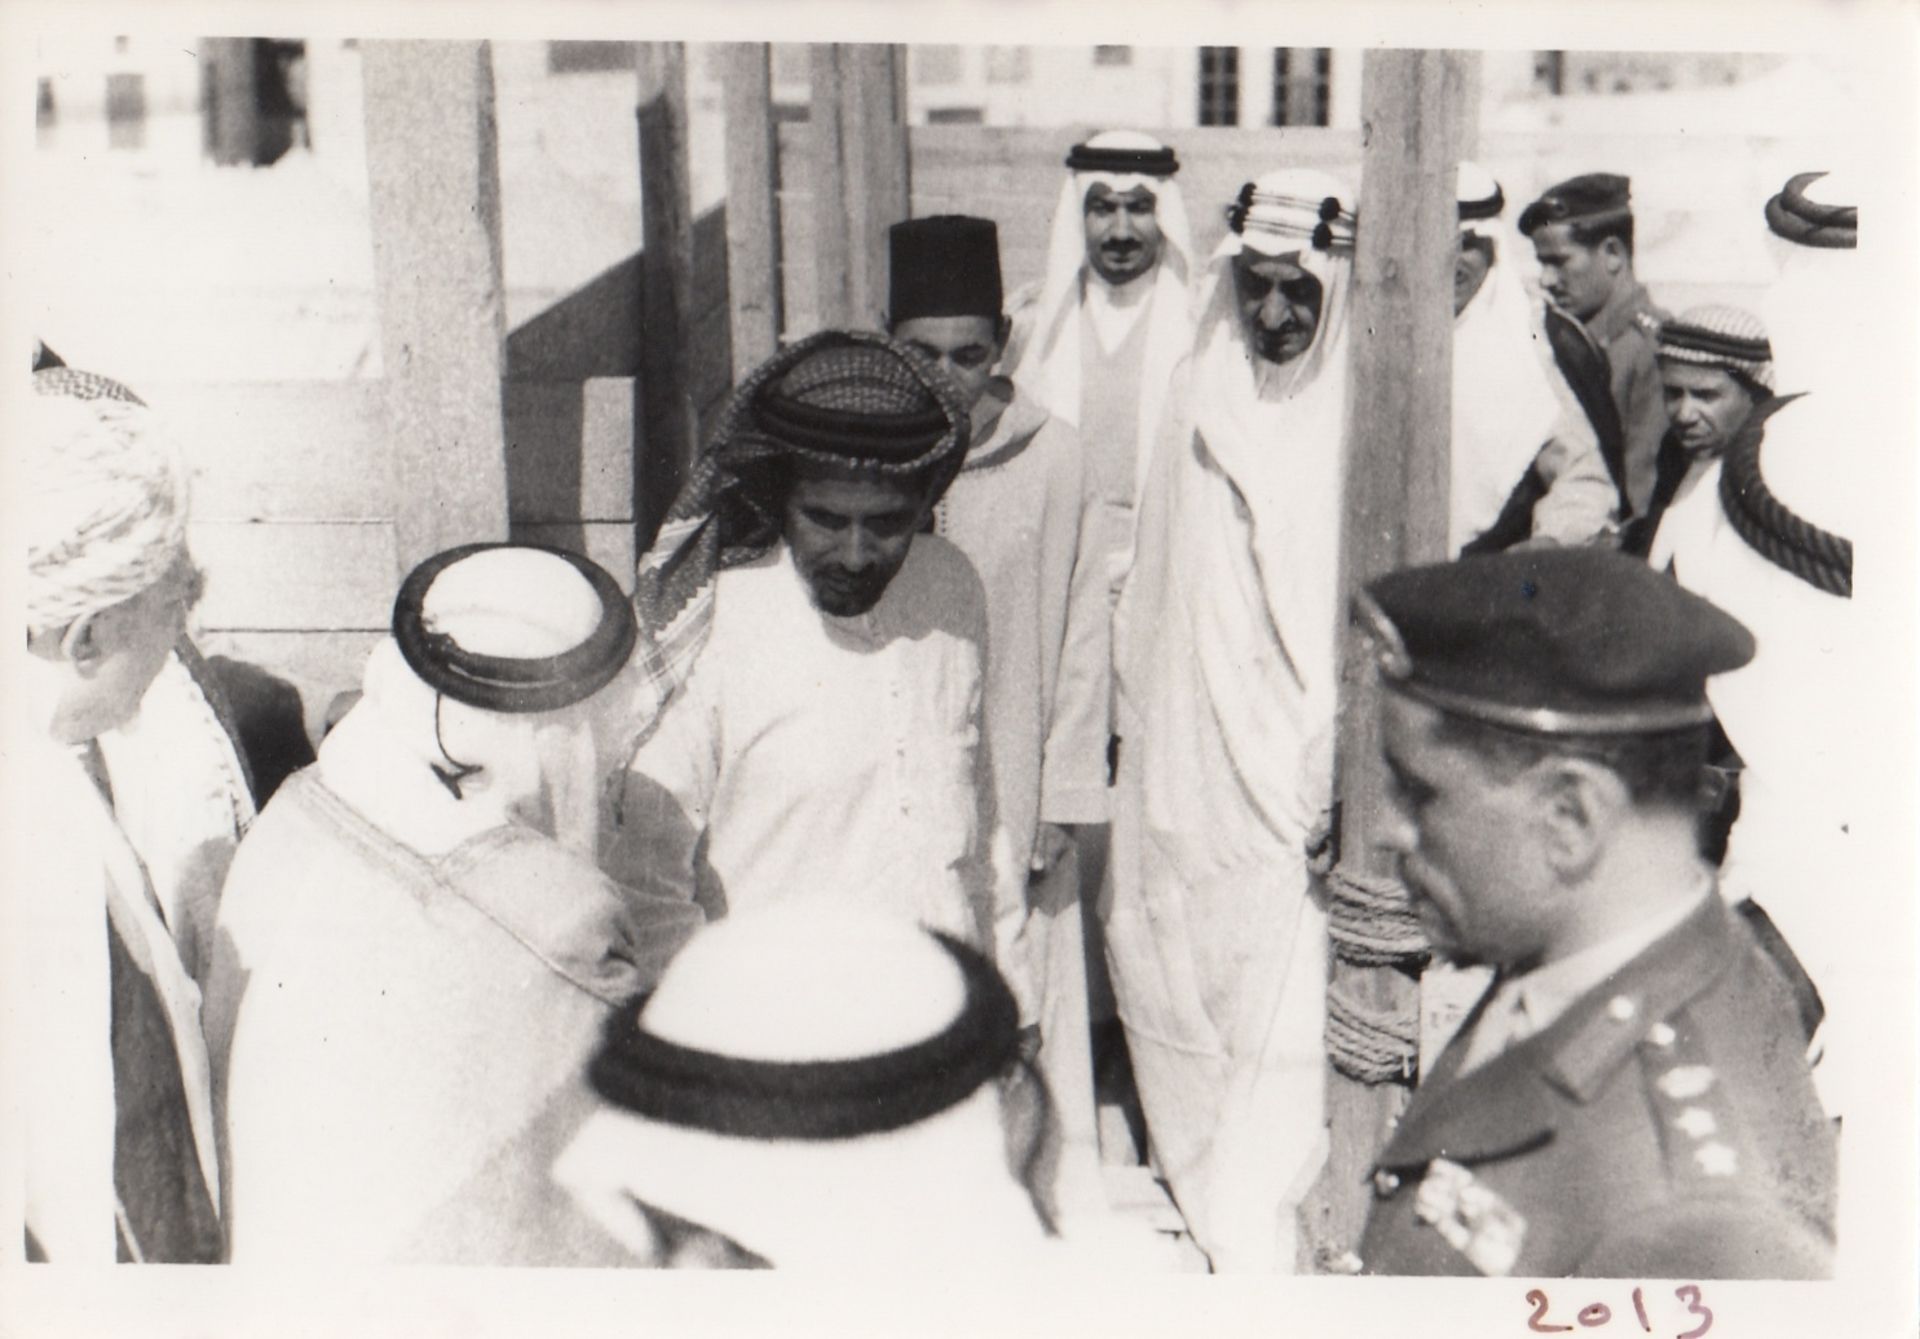 A COLLECTION OF PHOTOGRAPHS OF HIS MAJESTY KING FAISAL BIN ABDUL AZIZ VISITING THE GRAND MOSQUES OF - Image 6 of 24